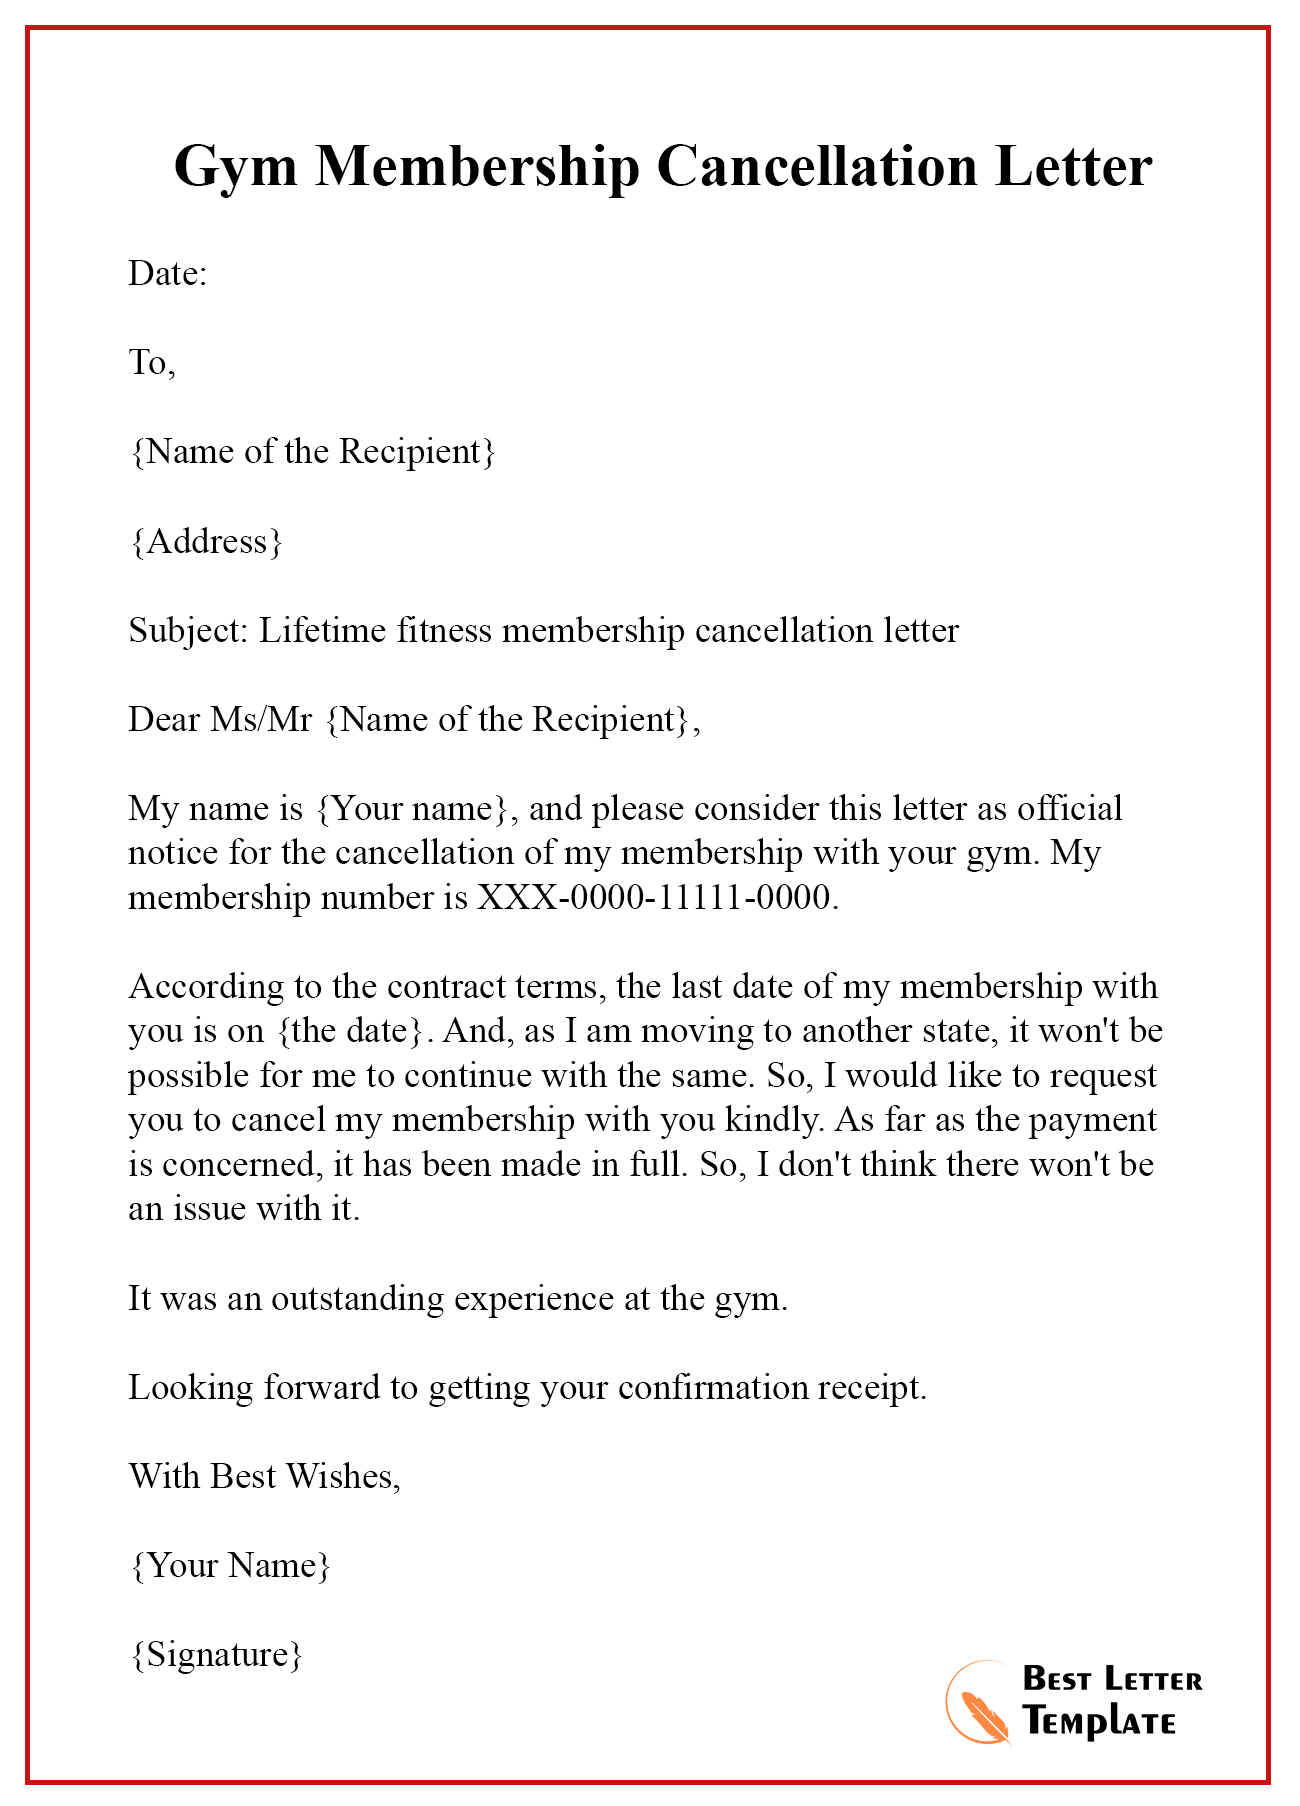 Membership Cancellation Letter Template Format Sample & Example